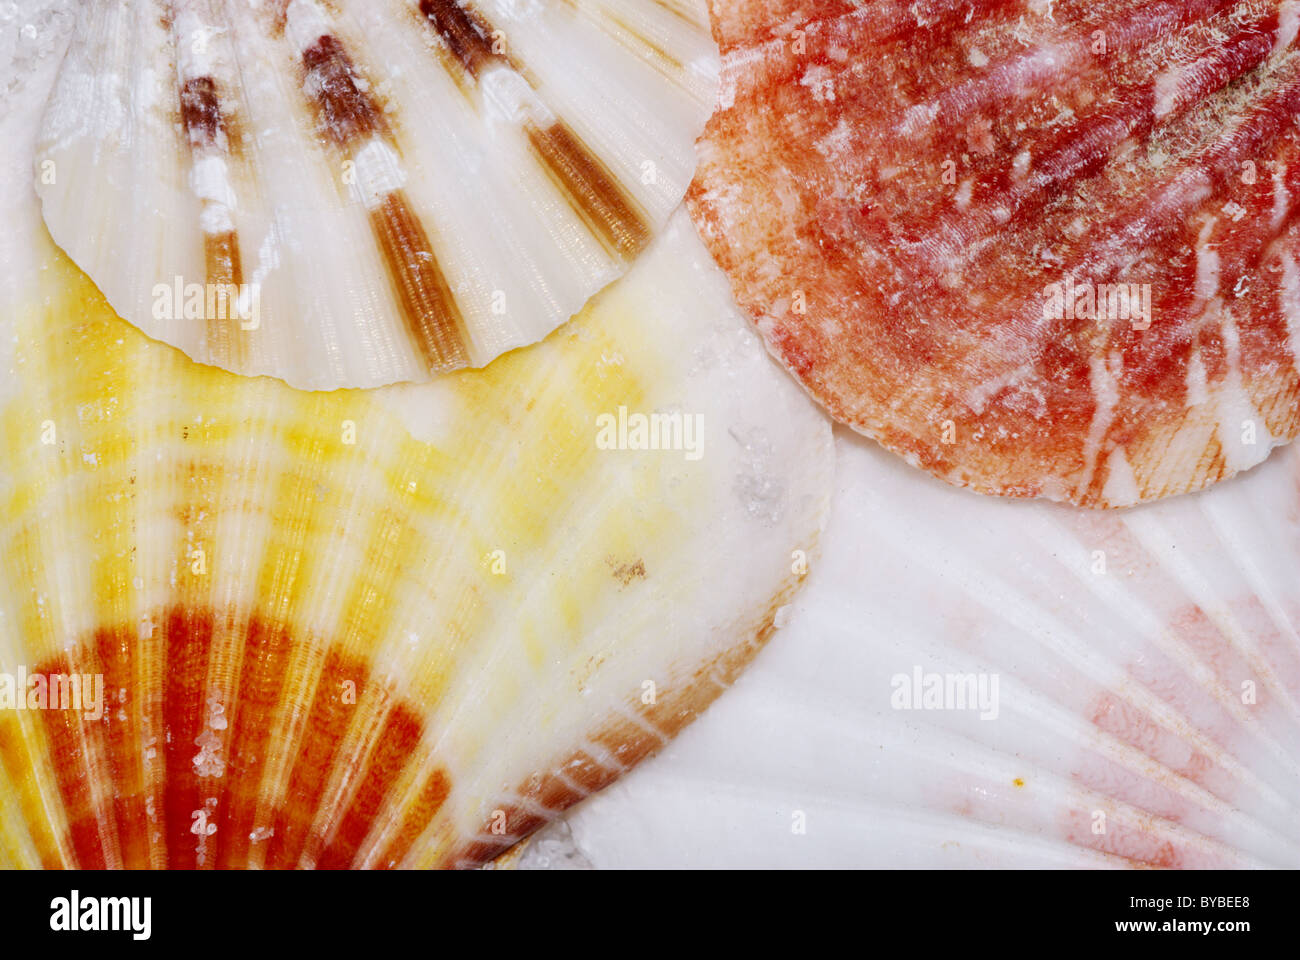 Closeup of four different color scallop shells Stock Photo